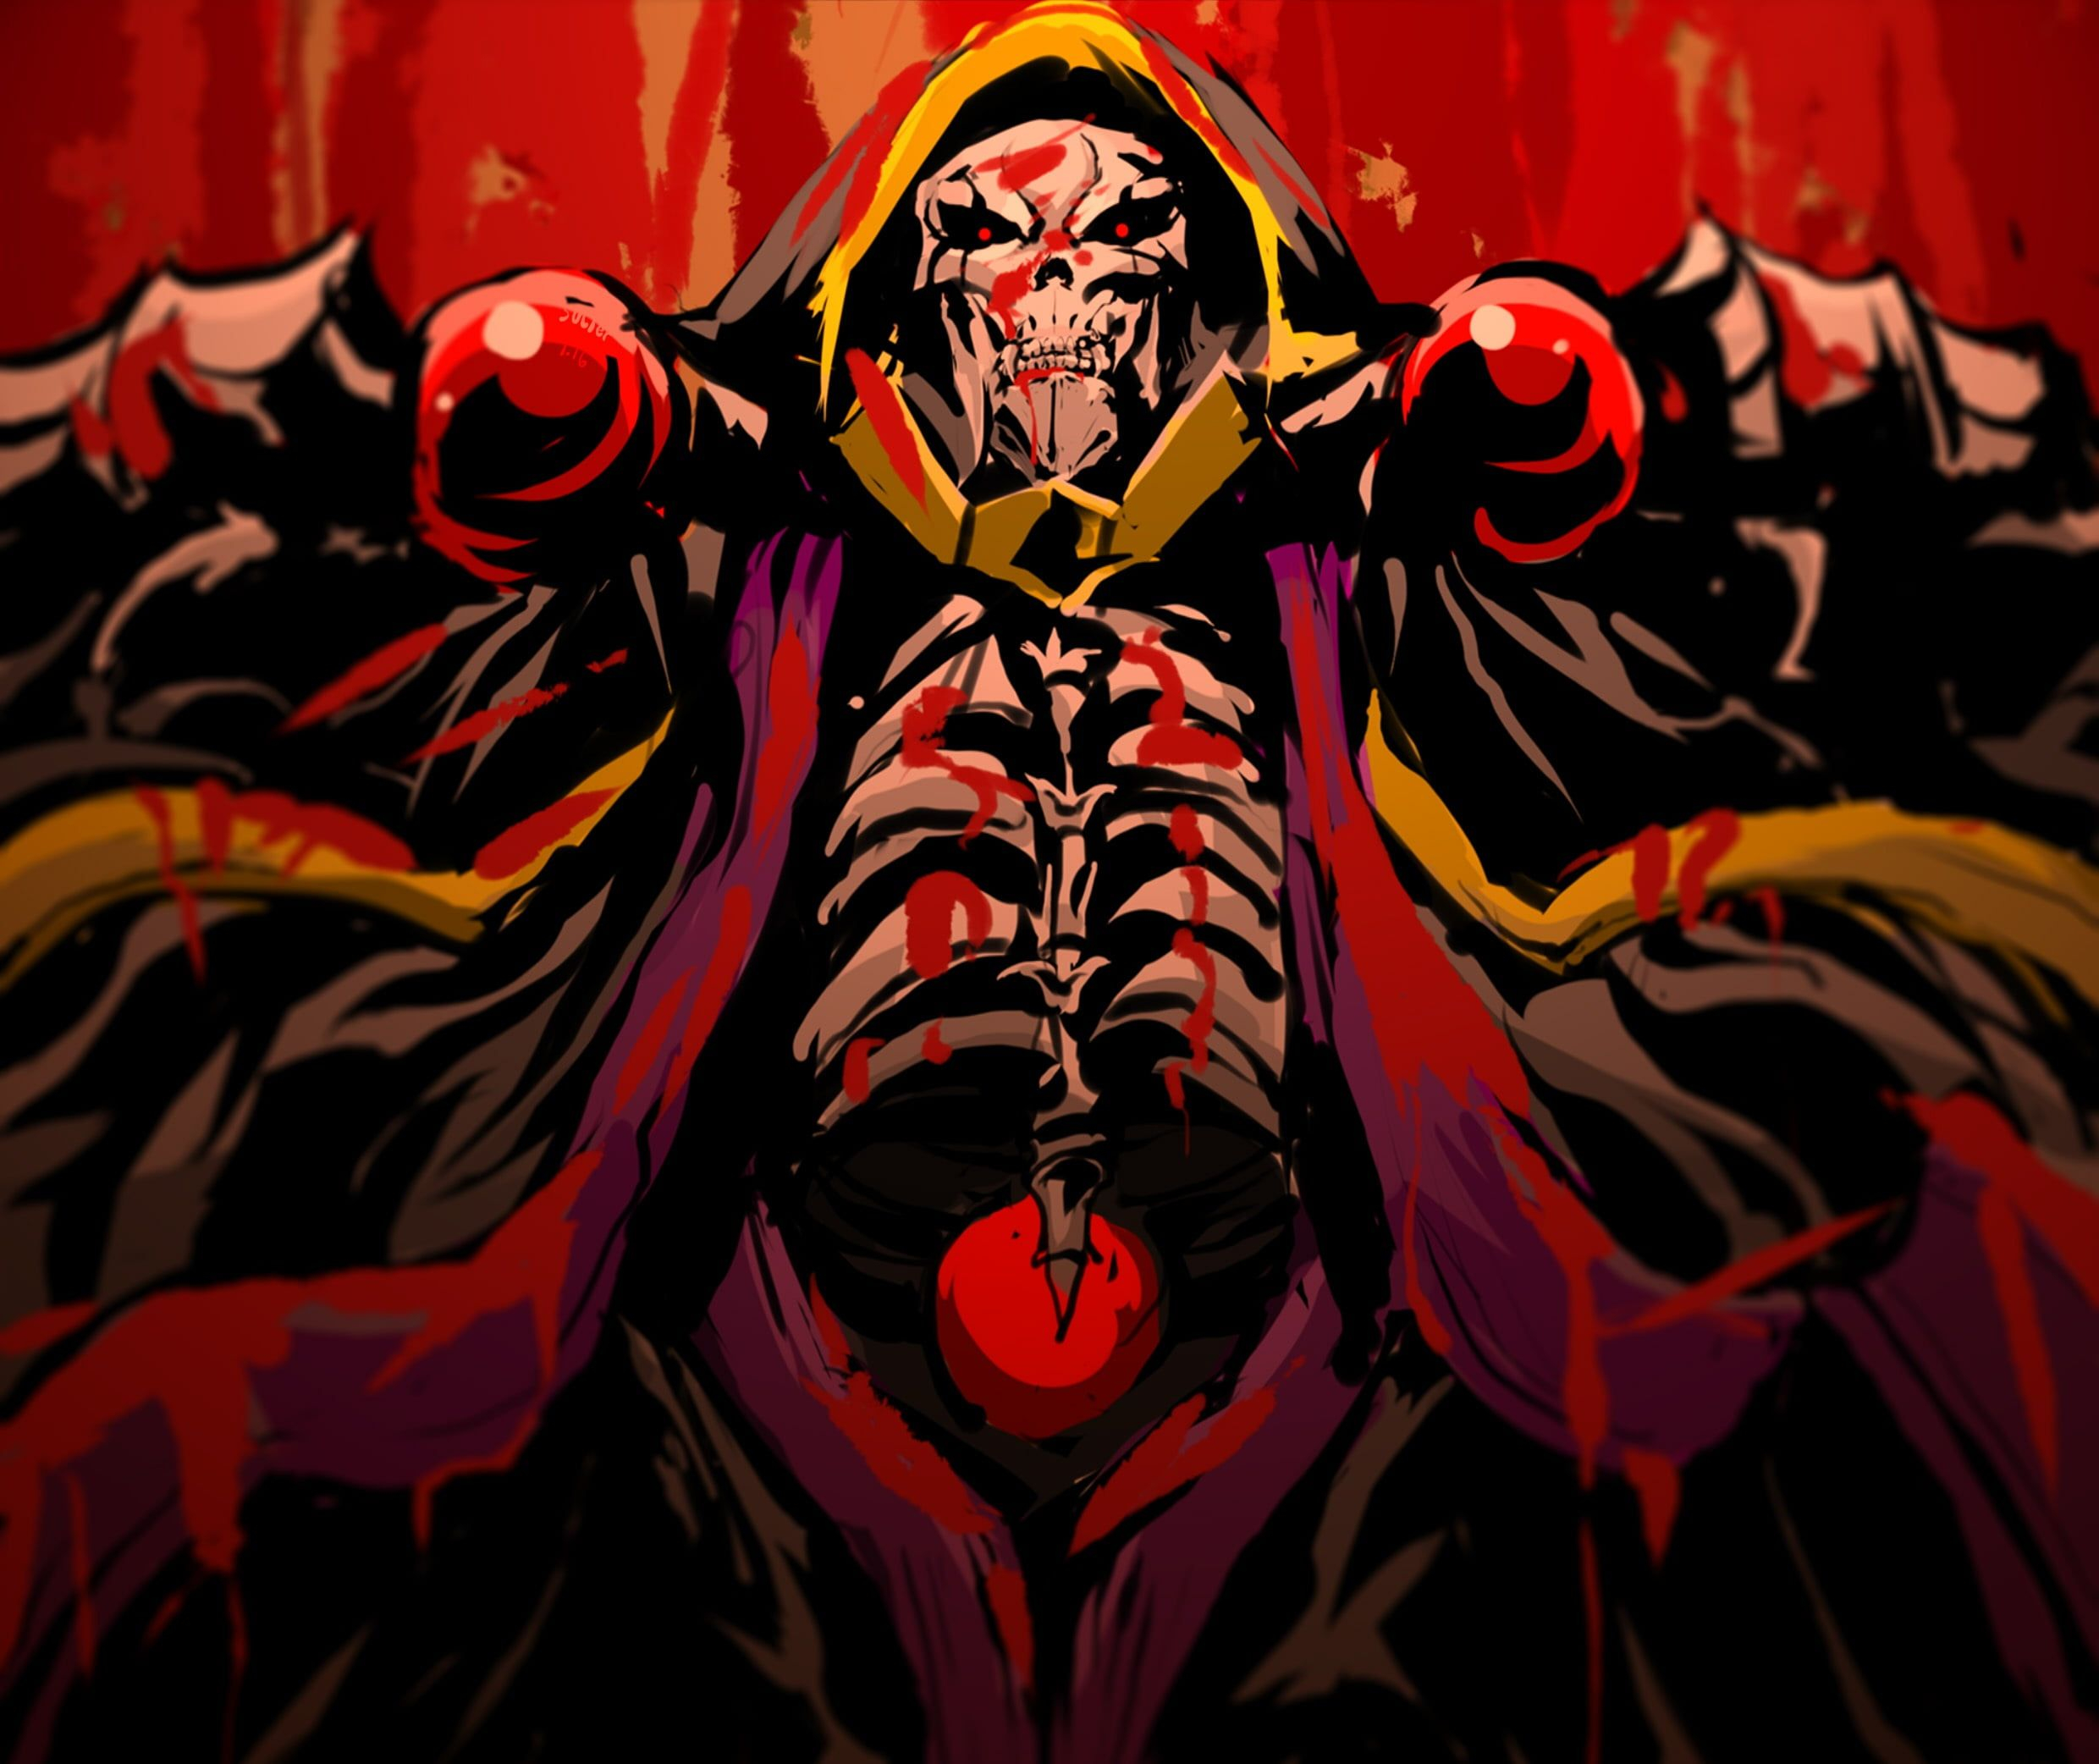 2480x2084 Anime #Overlord Ainz Ooal Gown #1080P #wallpaper #hdwallpaper #desktop | Anime wallpaper, Anime, Character wallpaper